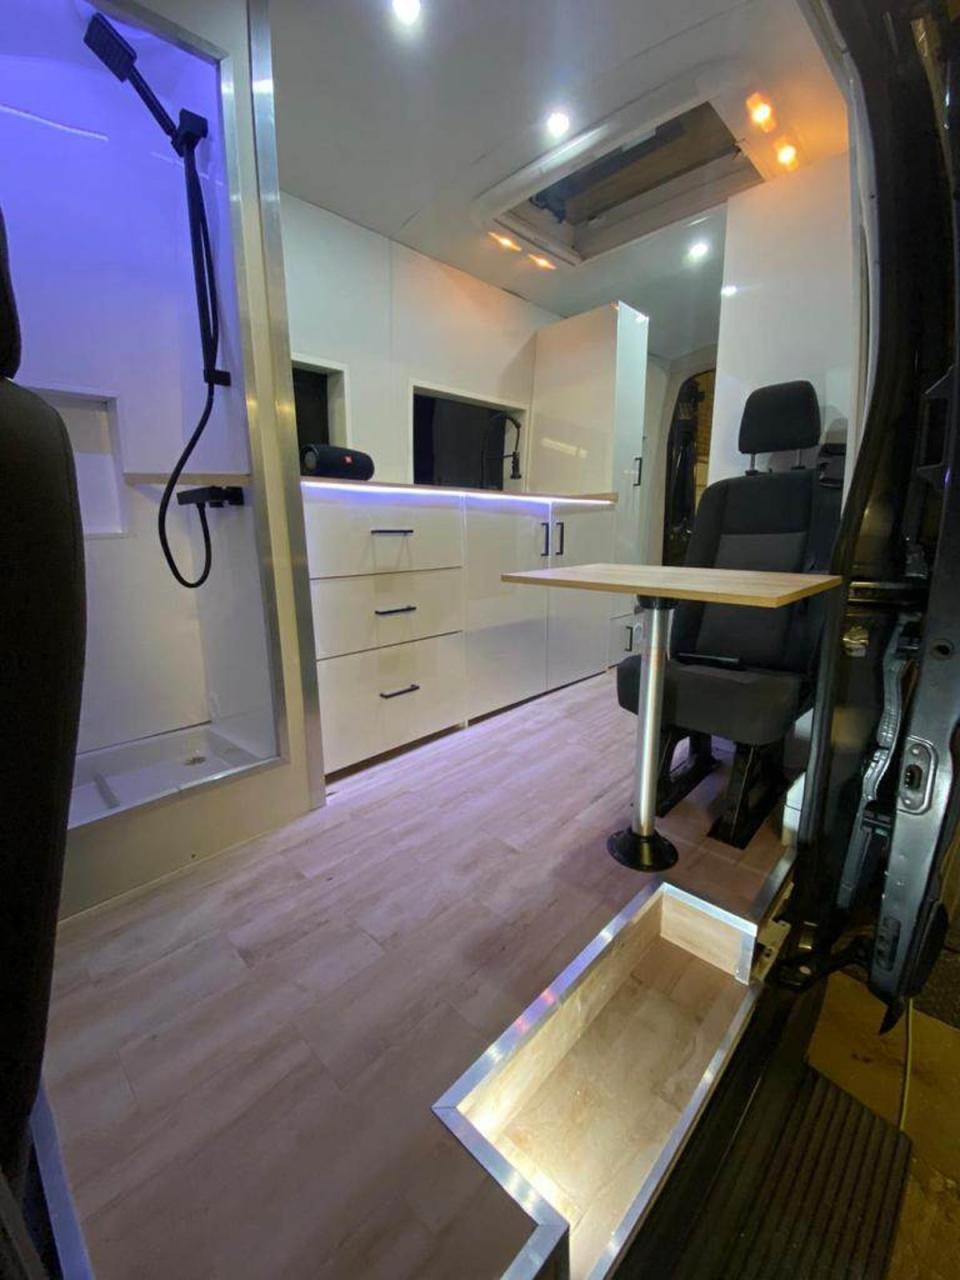 The couple fitted the van with a generous kitchen and shower (Robert Bolohan)